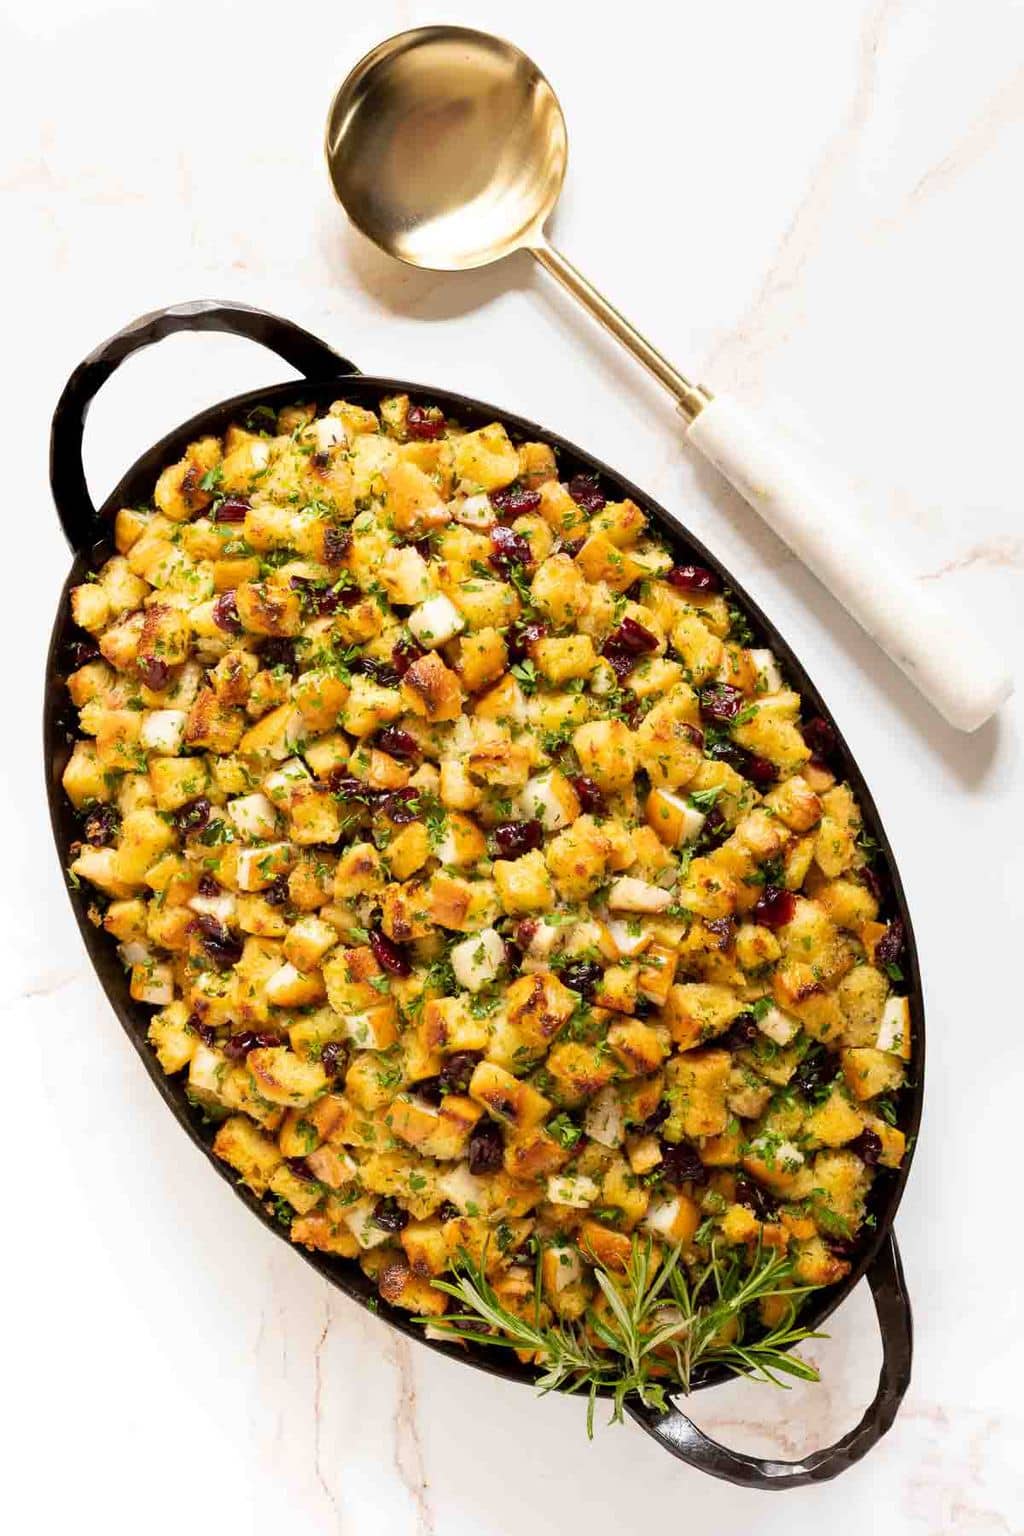 Vertical overhead photo of a hammered metal oval Smithey pan filled with The BEST Stuffing Recipe - Crispy, Buttery Herb Stuffing garnished with rosemary sprigs.